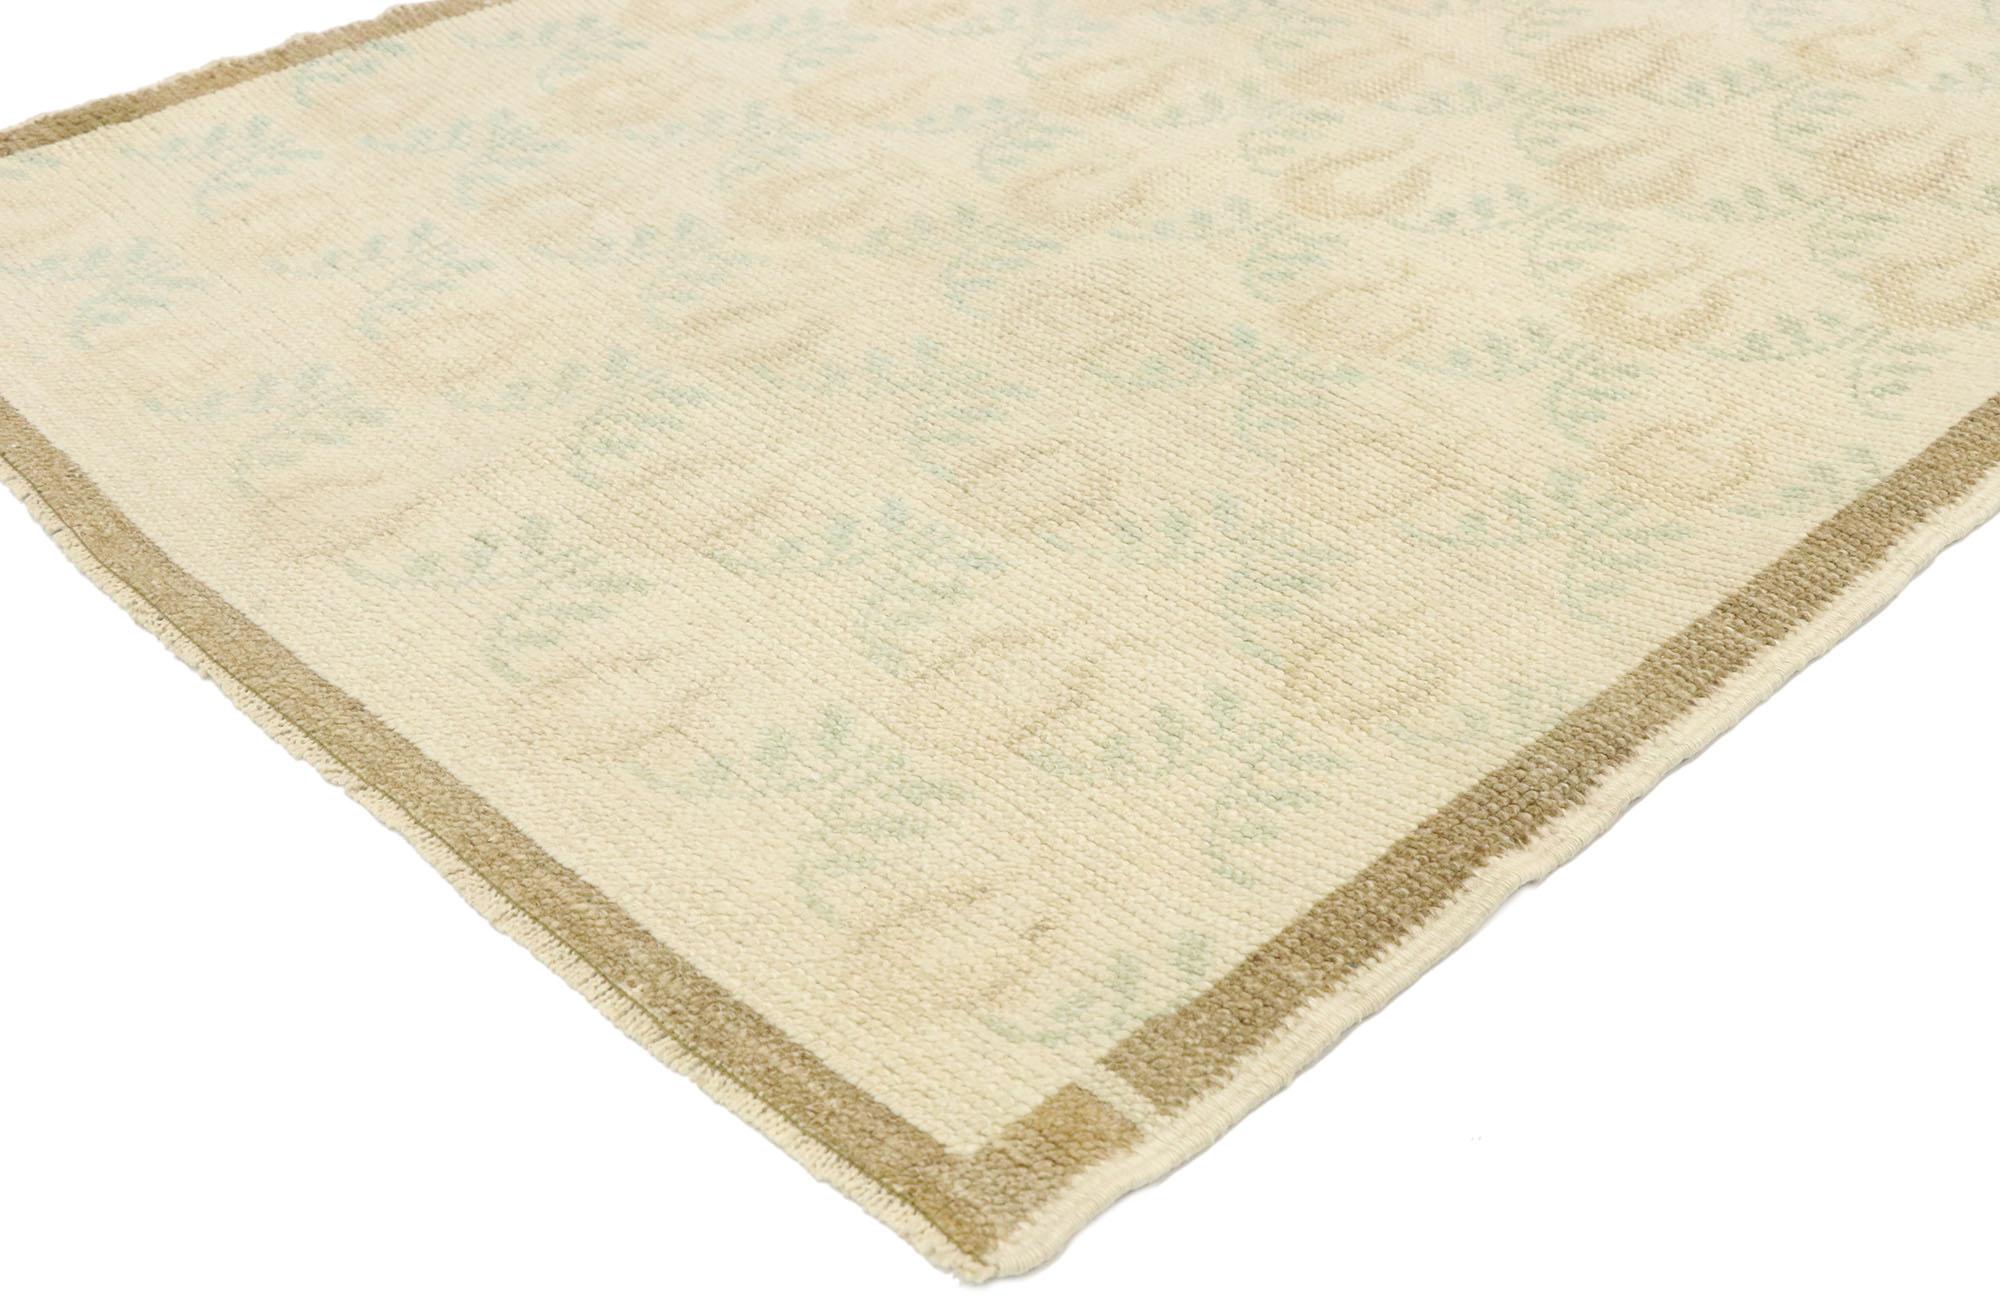 52983 vintage Turkish Oushak Accent rug with Romantic French Rococo Chateau style. Striking the perfect balance of understated elegance and symmetry with soft, bespoke vibes, this hand knotted wool vintage Turkish Oushak accent rug beautifully